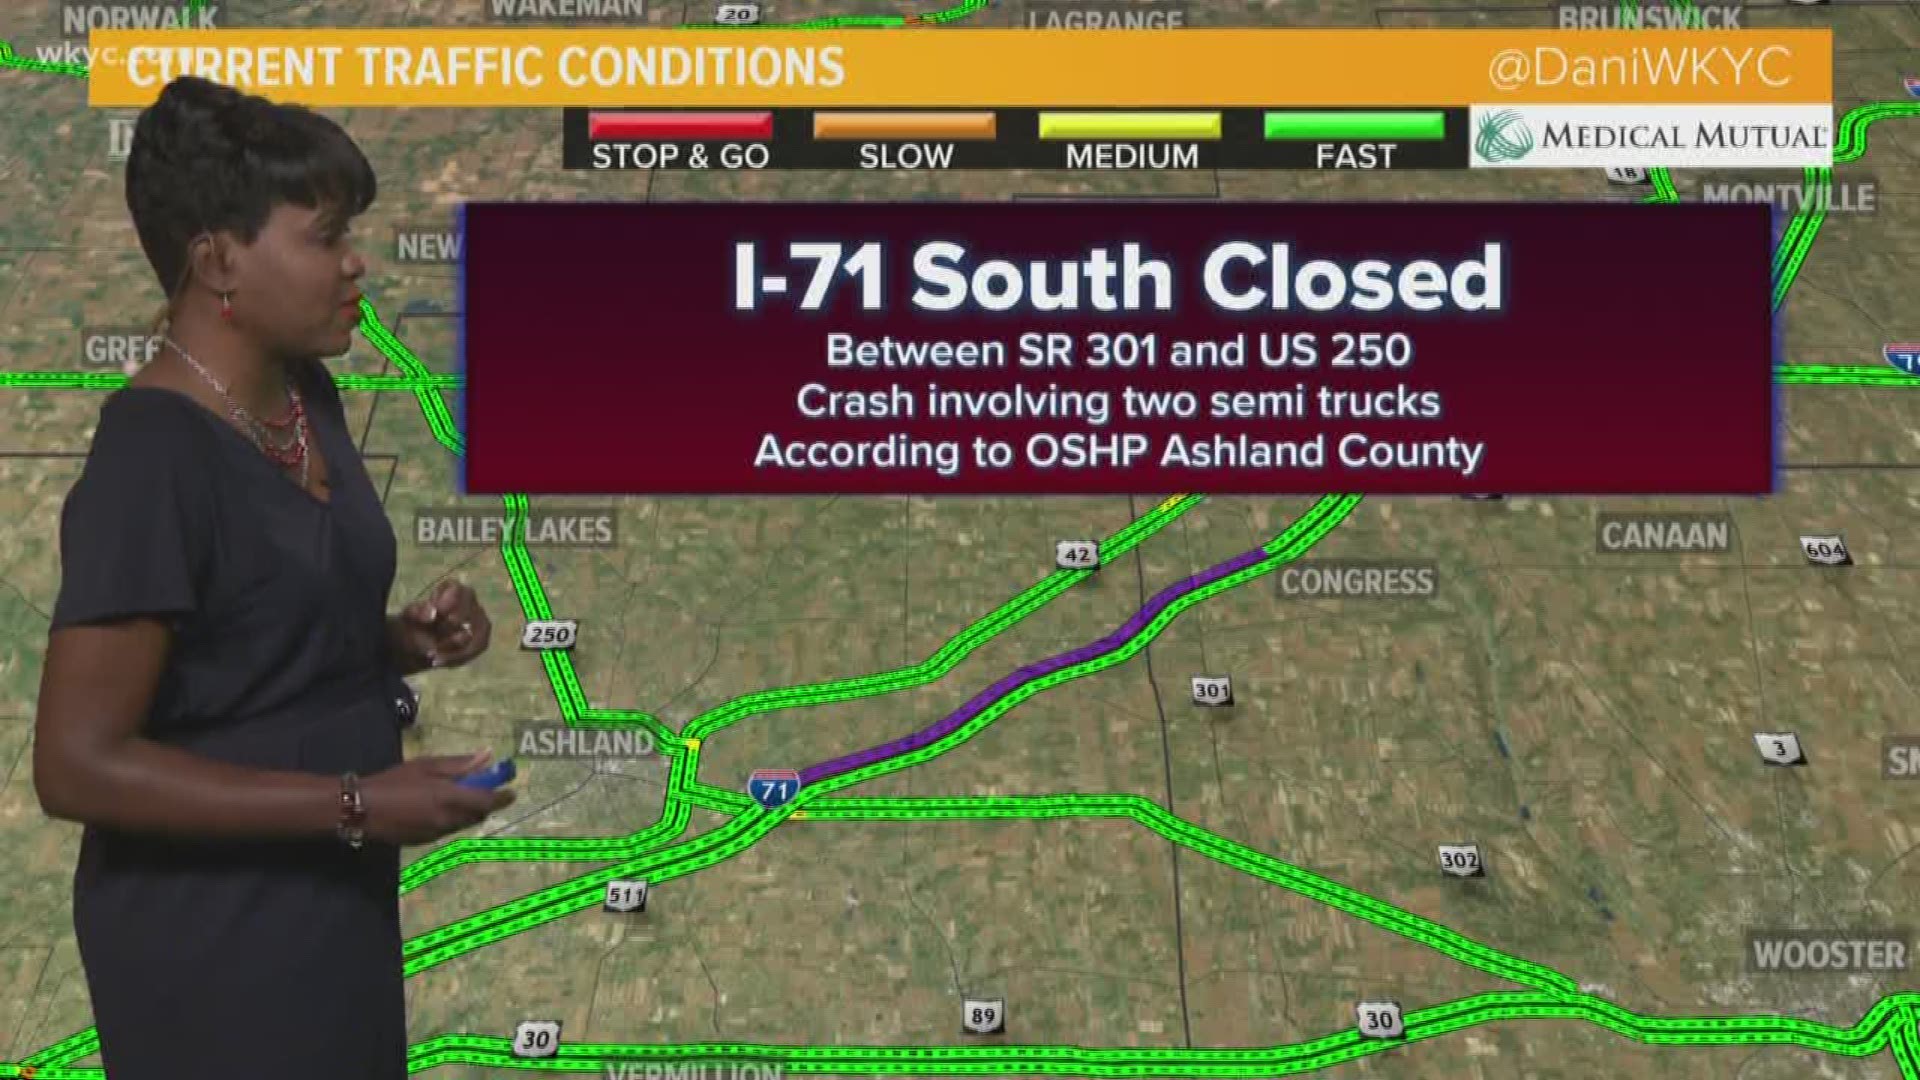 Sept. 20, 2019: A stretch of I-71 South is closed in Ashland County as of 6 a.m. Friday due to a crash with two semi trucks.